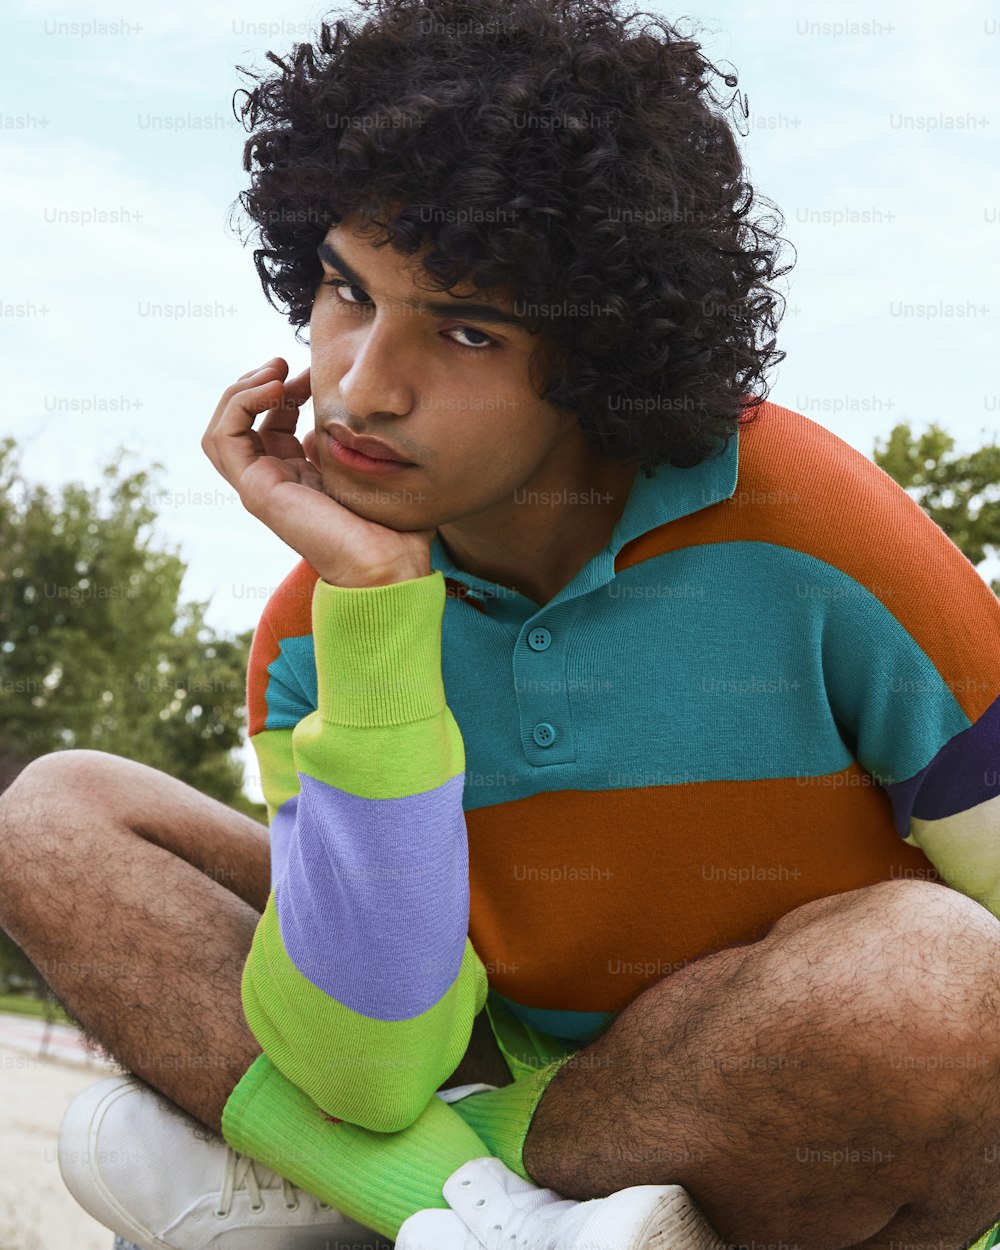 a man with curly hair sitting on a skateboard